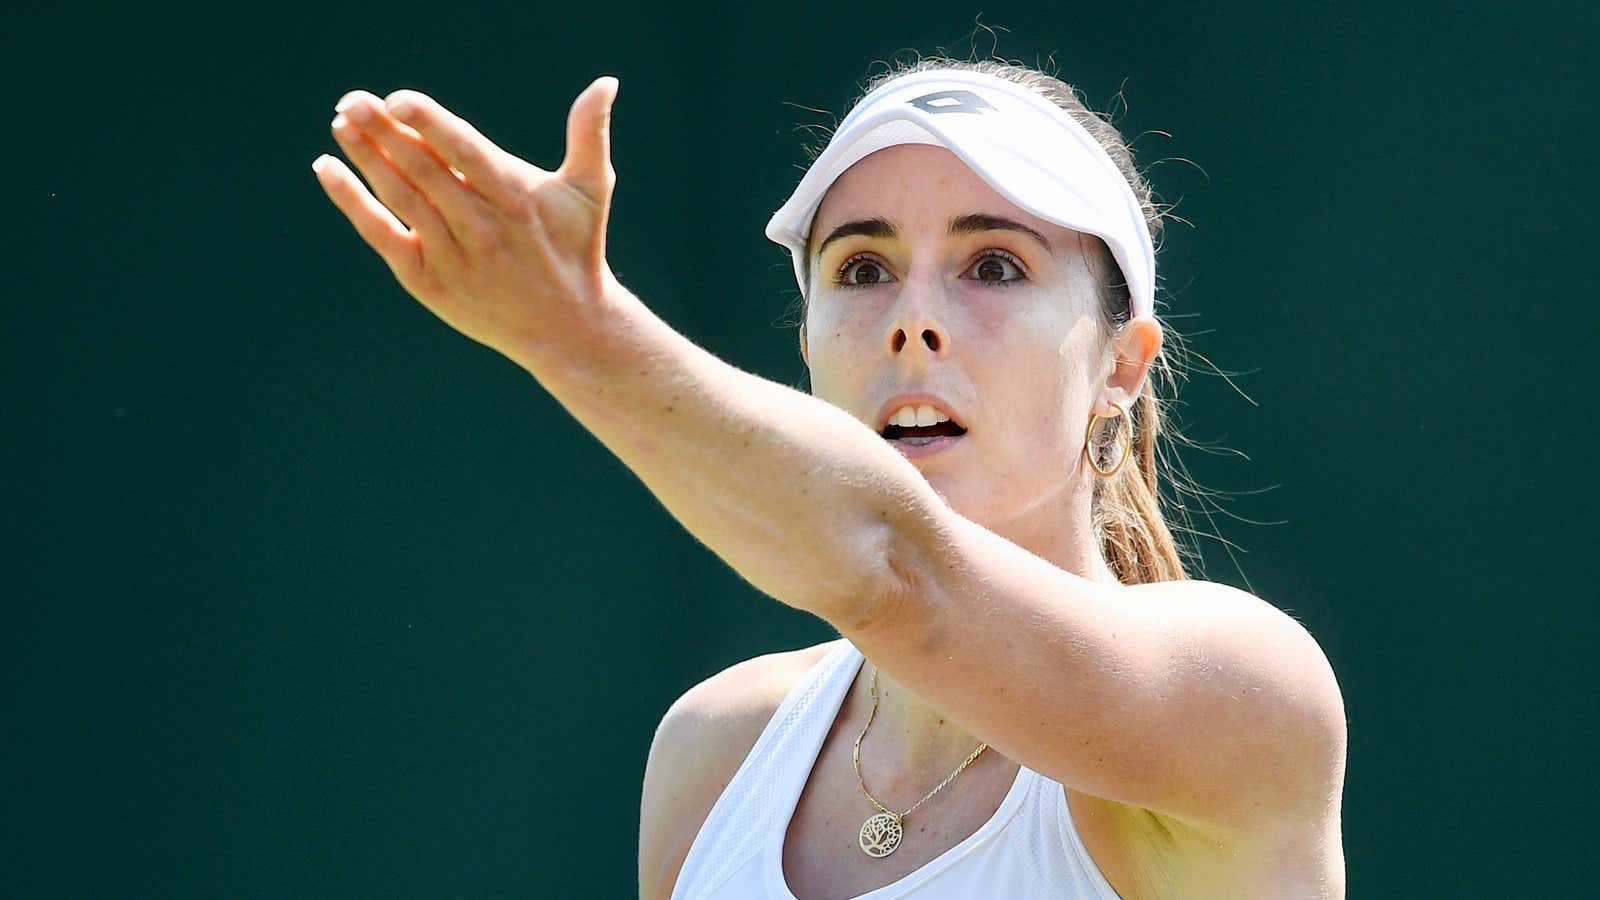 Alizé Cornet's sports-bra spat shows how tennis is becoming a